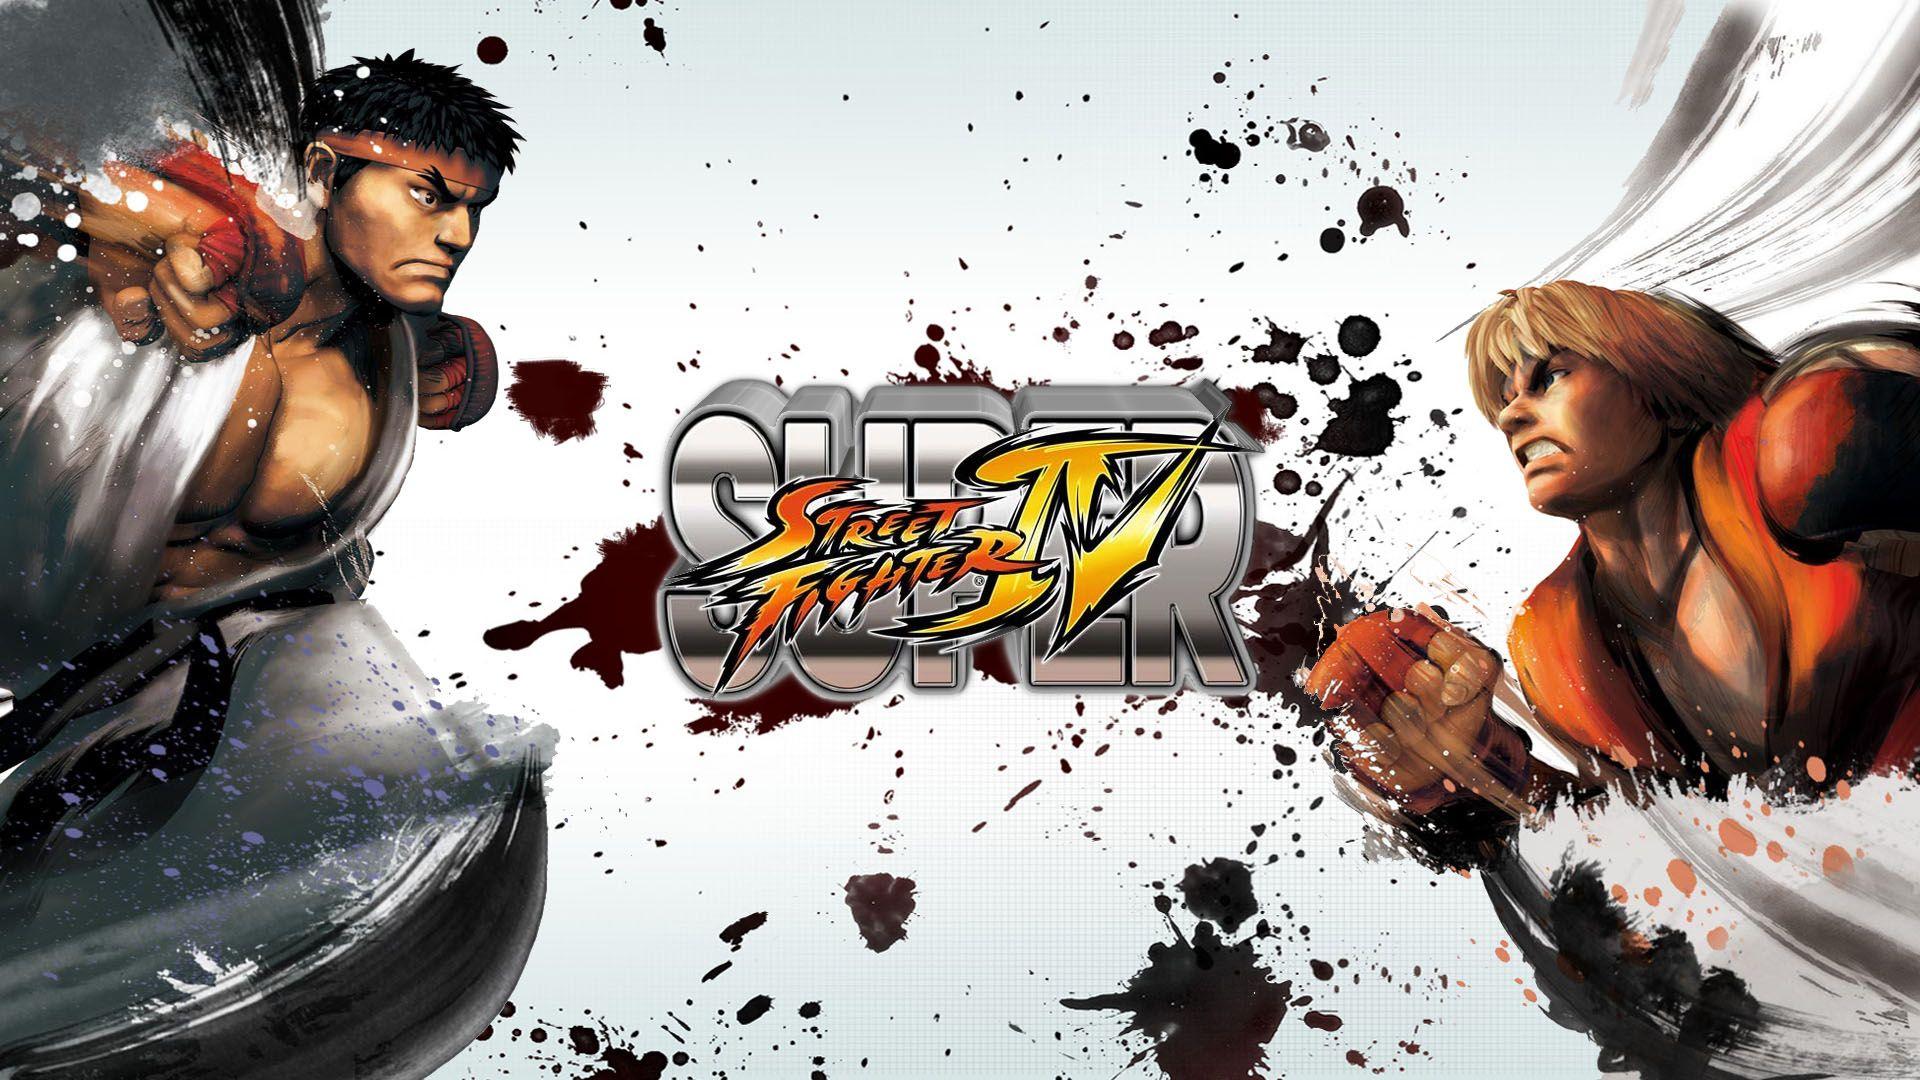 entries in Ryu Street Fighter Wallpaper group